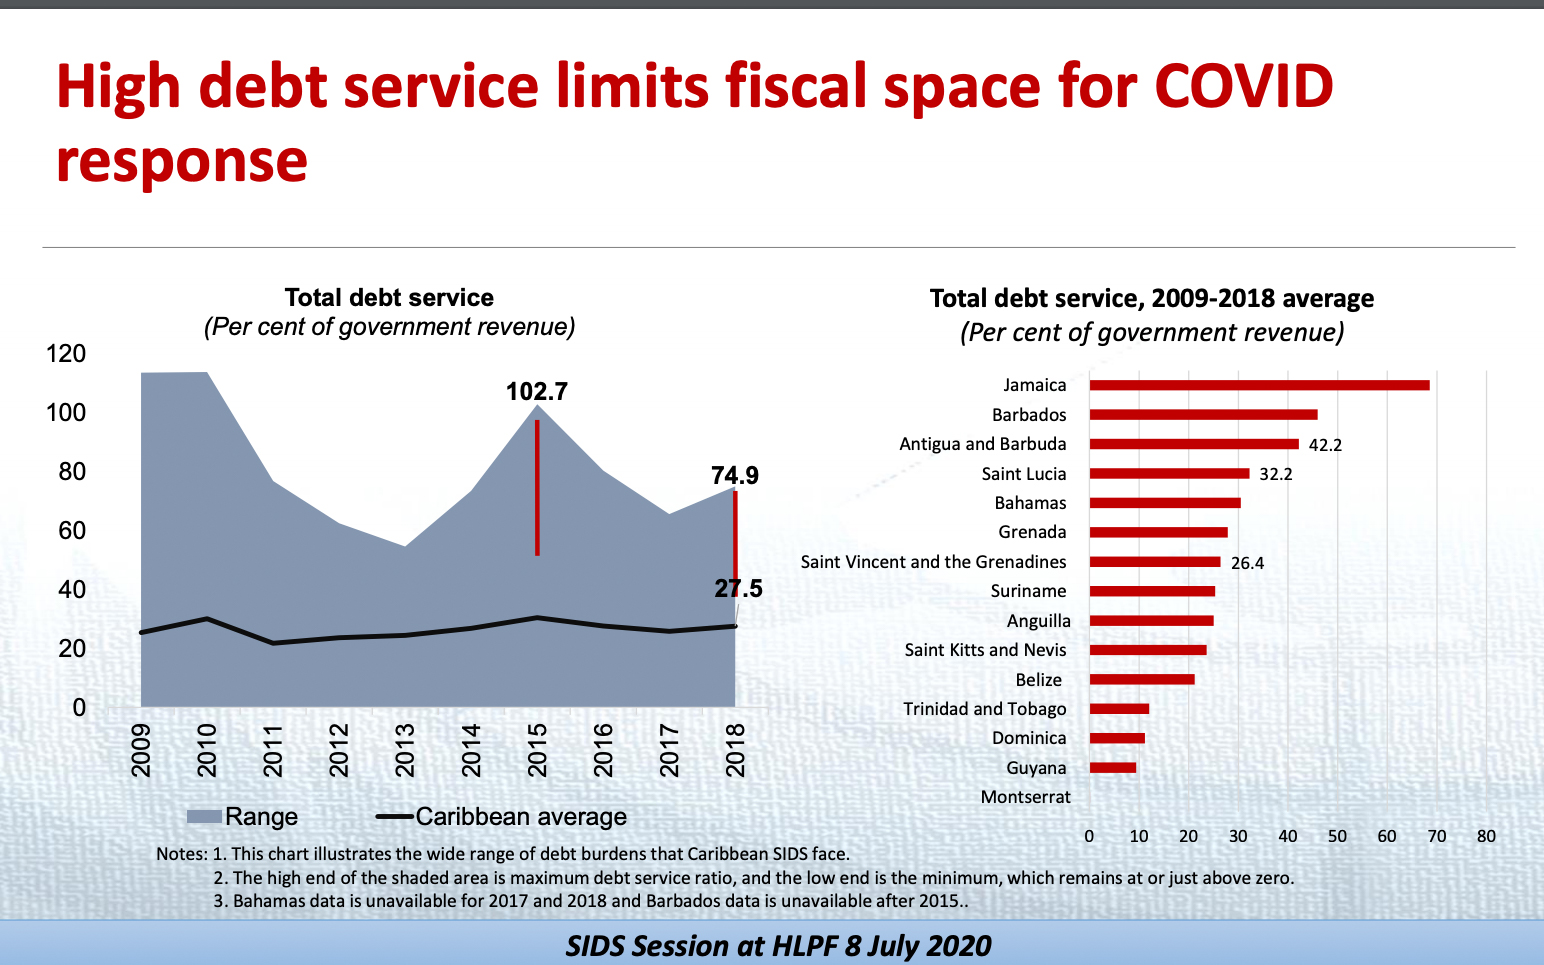 A slide demonstrates how high debt service limits fiscal space for COVID-19 response for SIDS.